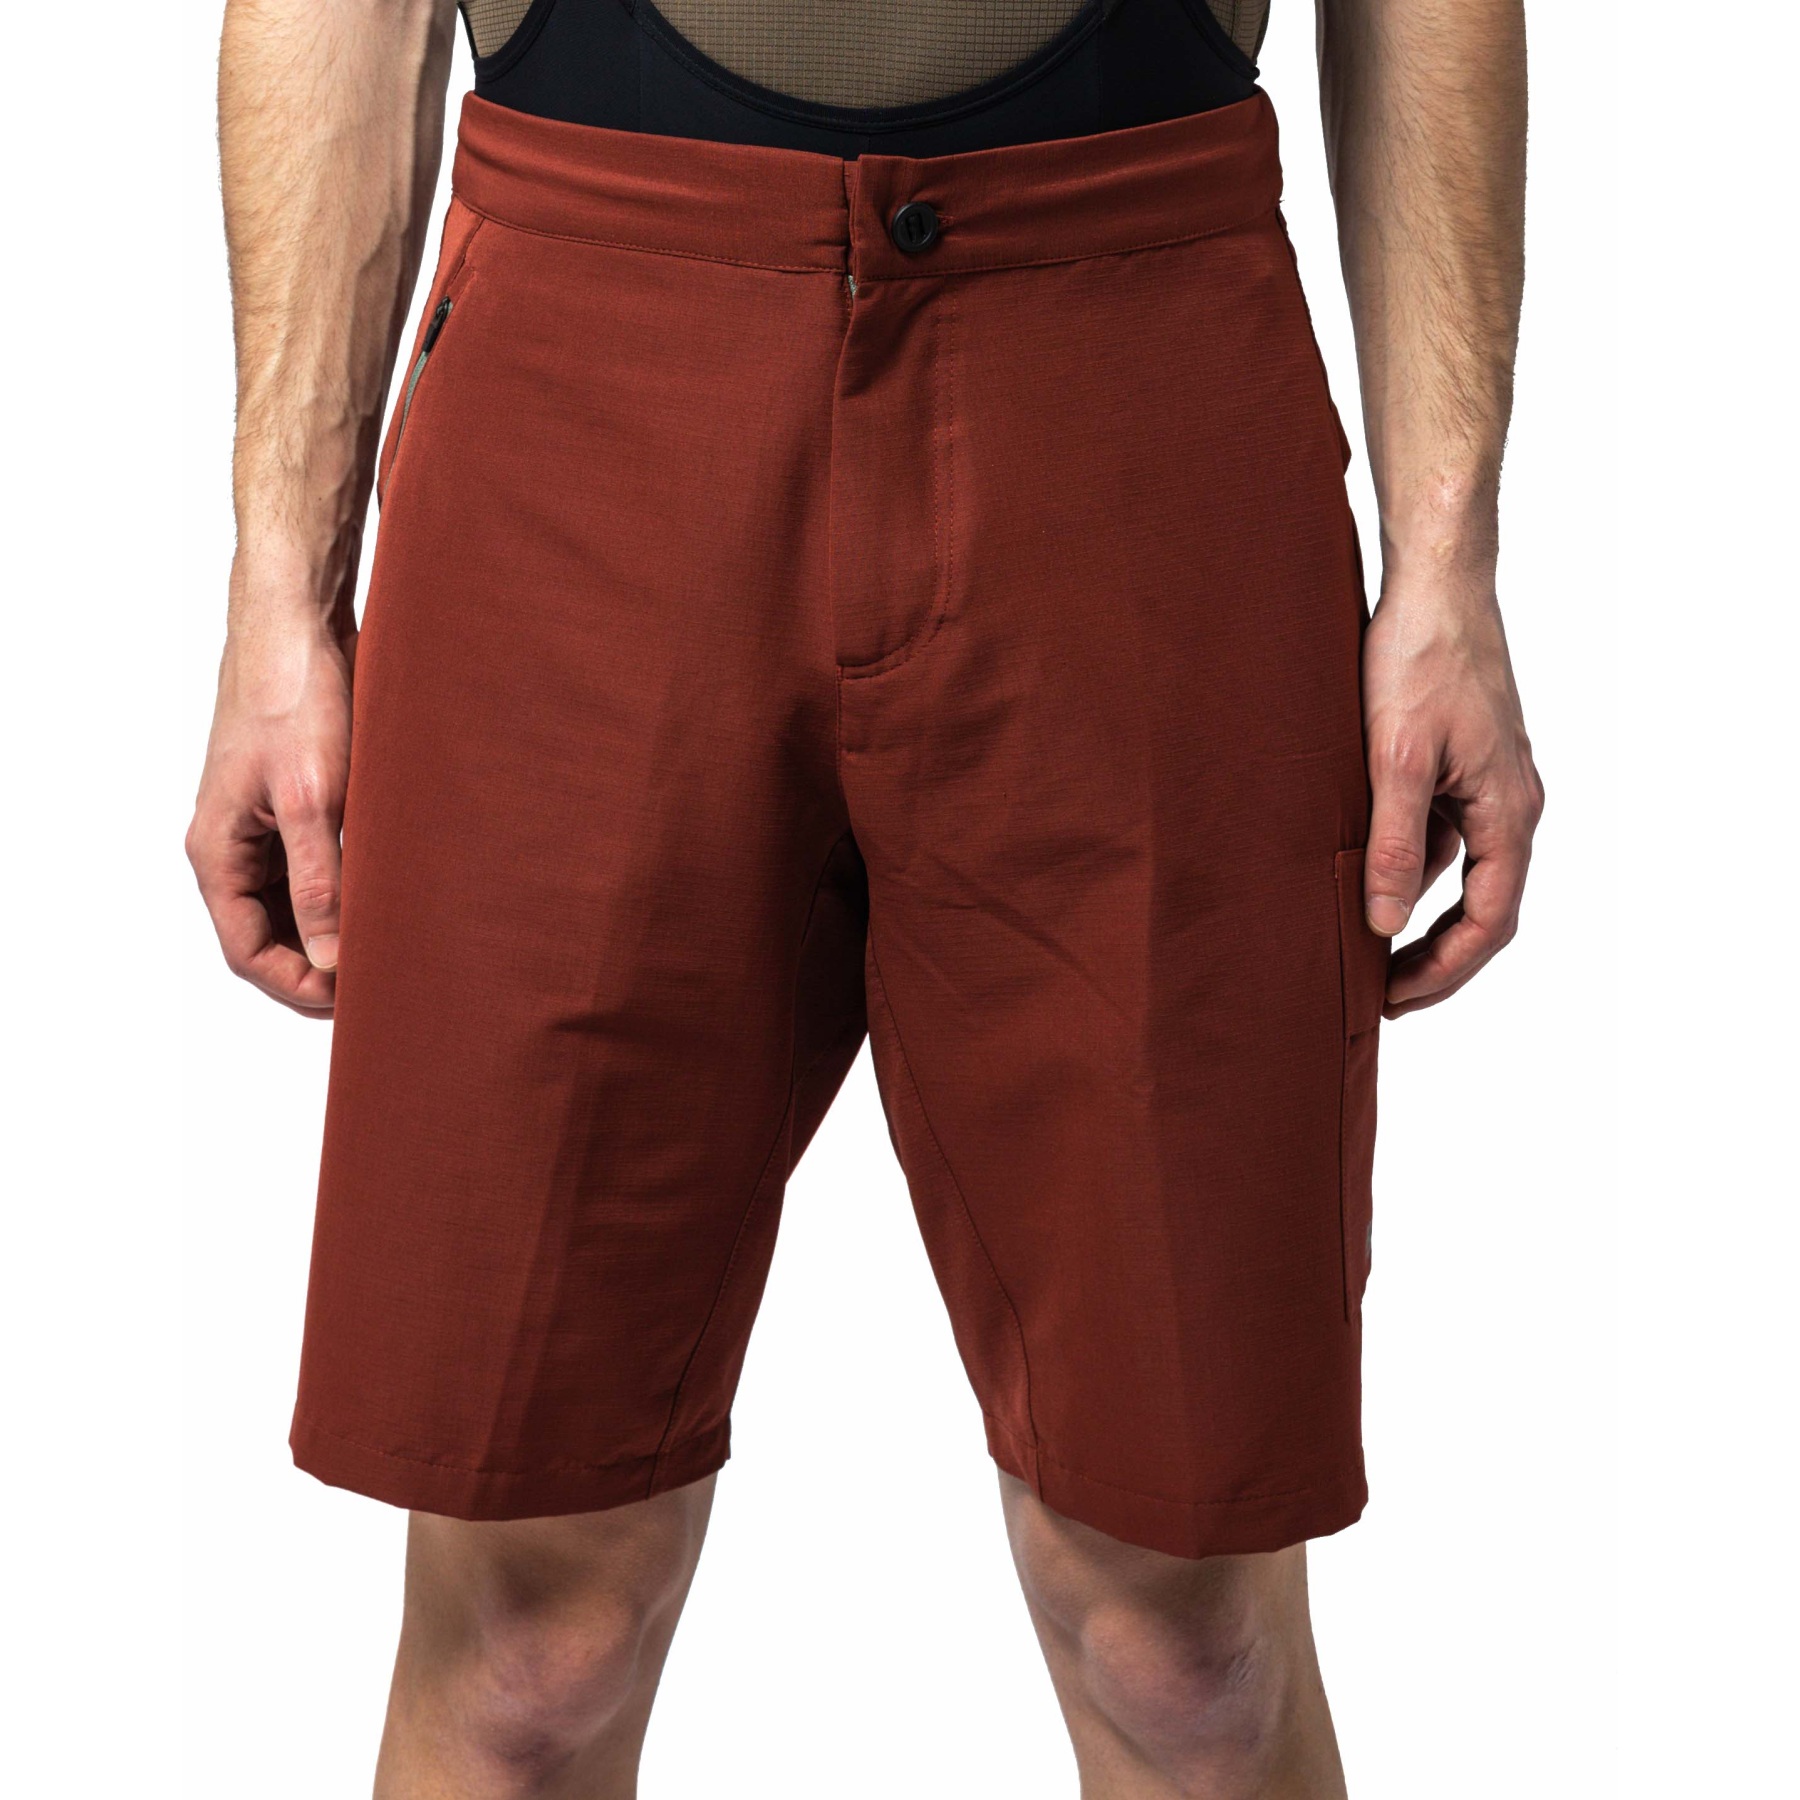 Picture of PEdALED Jary Gravel Shorts Men - Madder Brown